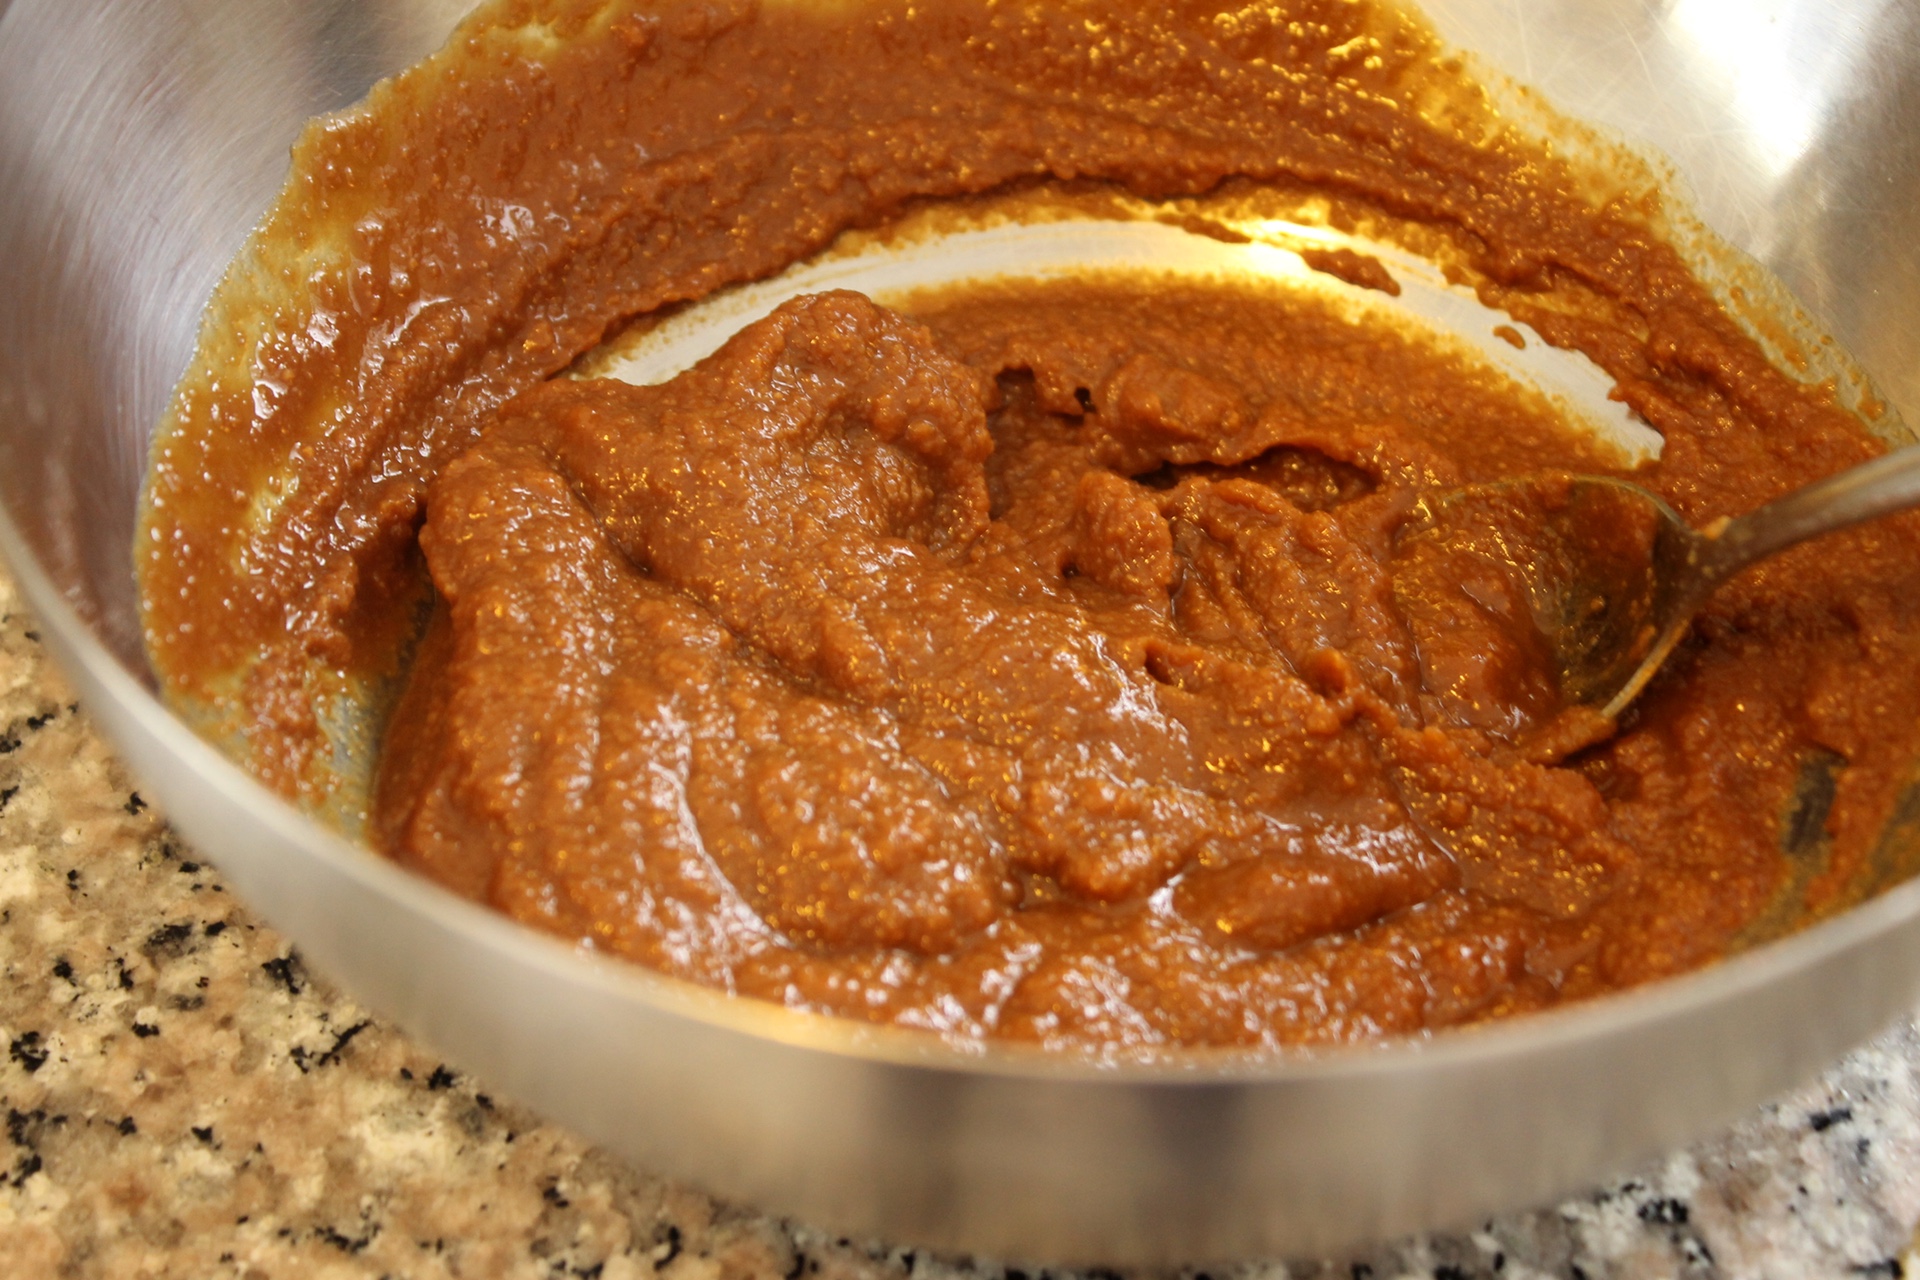 To make miso tare, stir together red miso paste, soy sauce, and mirin until smooth.